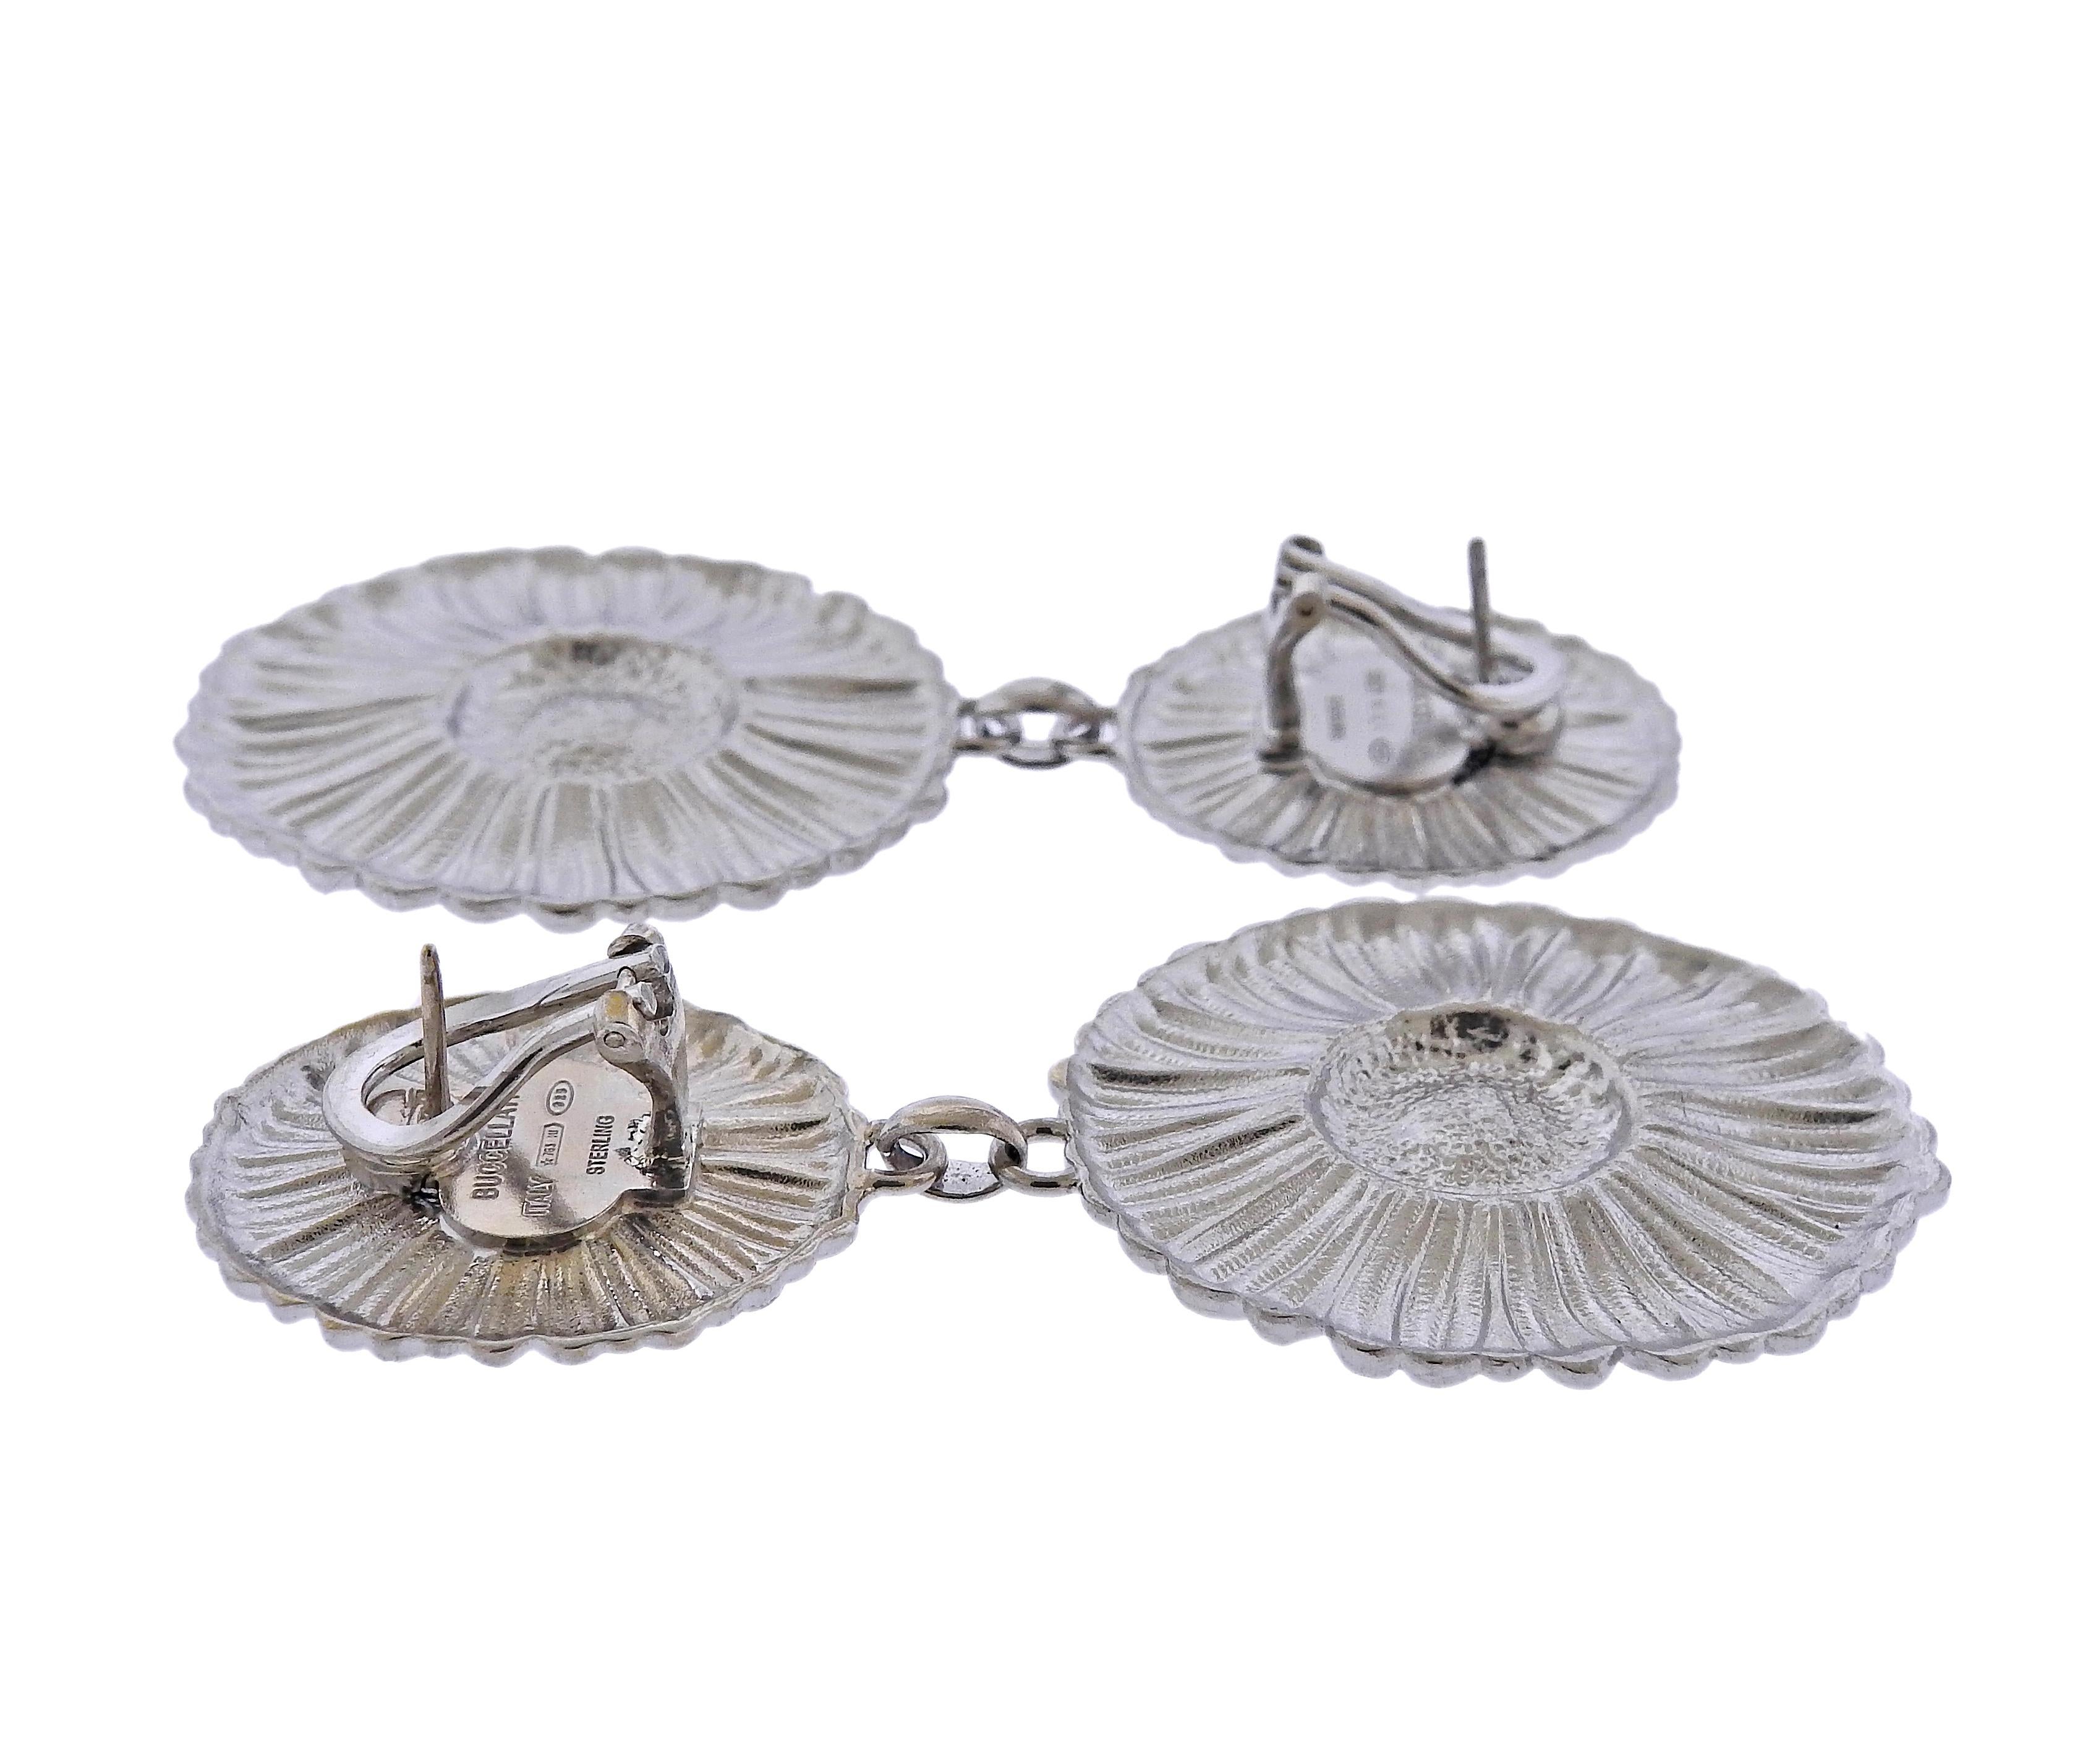 Pair of sterling silver and vermeil Buccellati Blossom earrings, featuring Daisy flowers. Earrings are 68mm long, bottom larger flower is 34mm in diameter.  Weight - 24.3 grams. Marked: Buccellati, Italy, Sterling, 925, 763 MI.